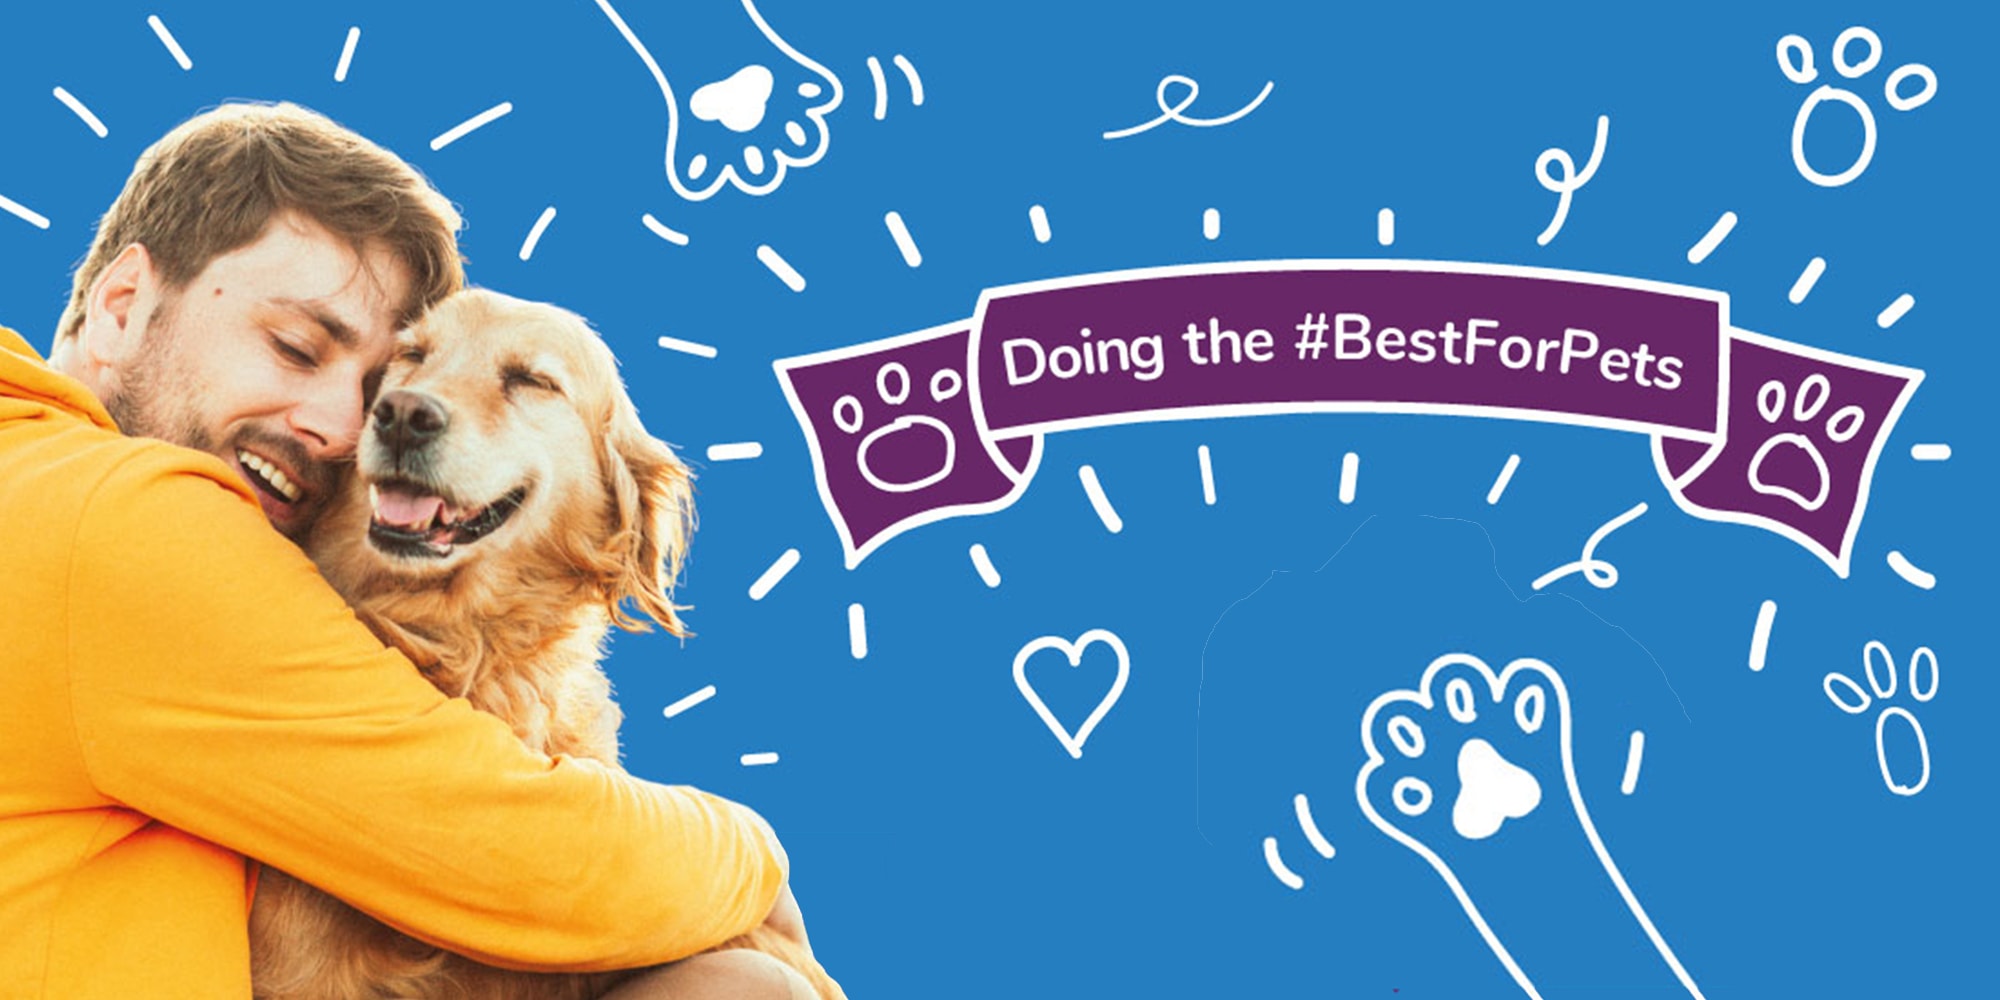 Doing the #BestForPets